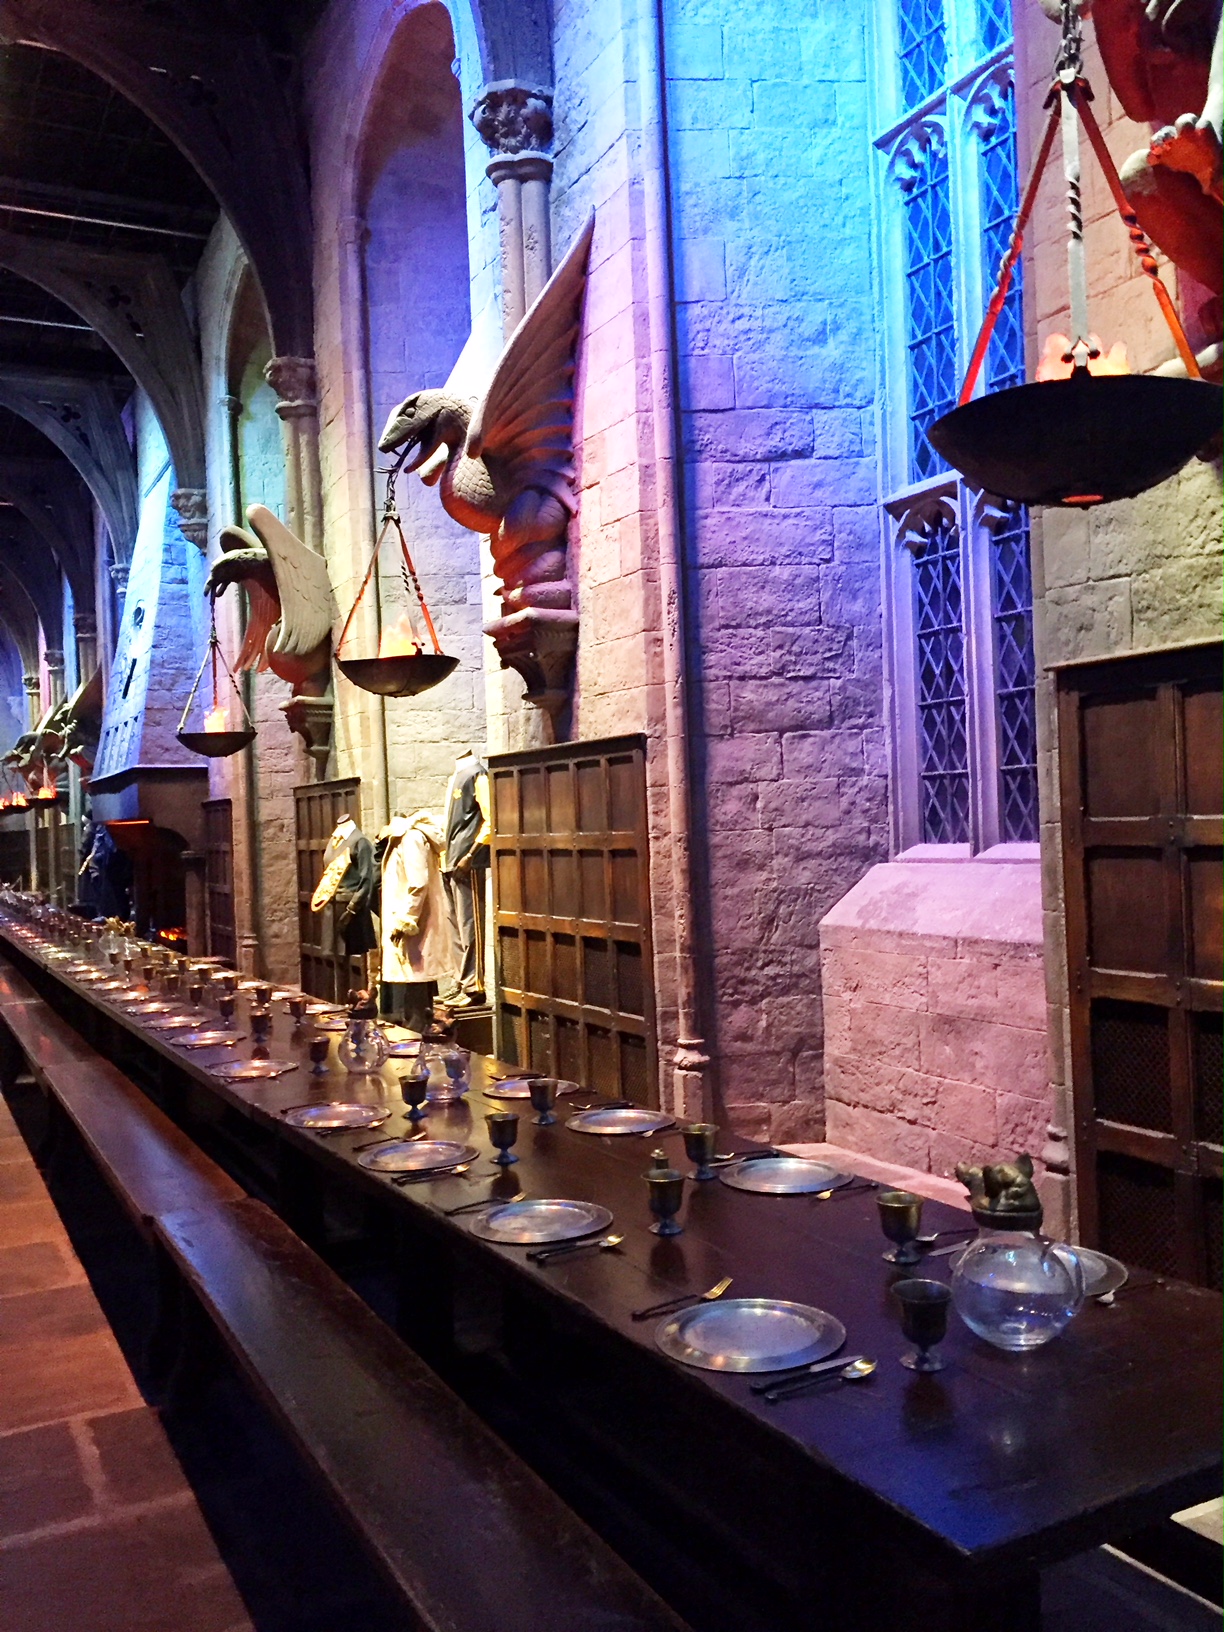 The Great Hall at the Harry Potter Studio Tour in London